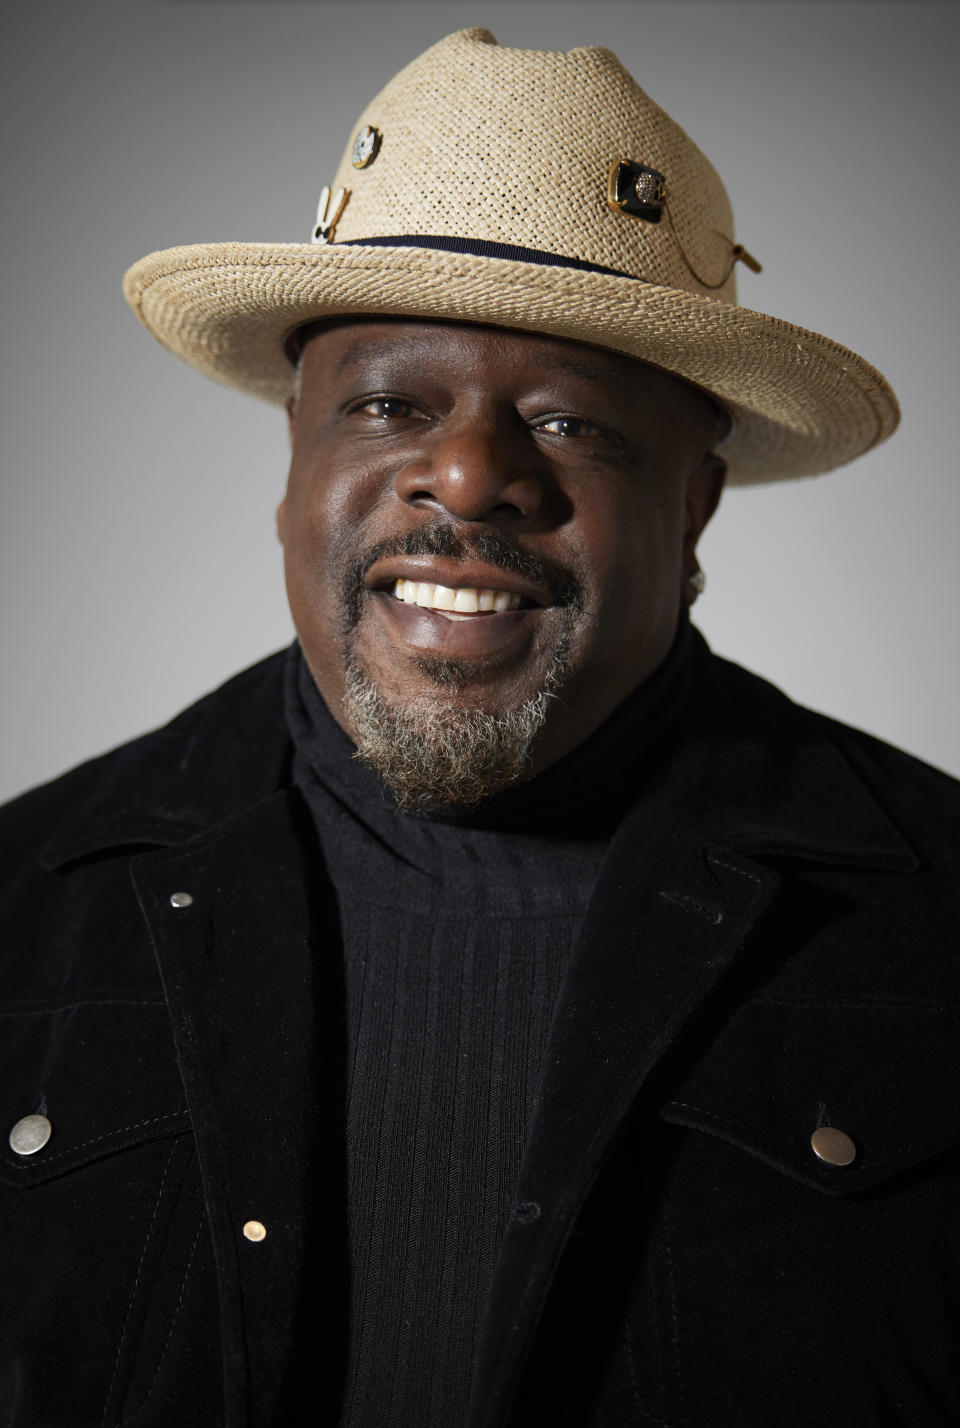 Cedric the Entertainer poses for a portrait on Wednesday, April 5, 2023, in New York. (Photo by Matt Licari/Invision/AP)